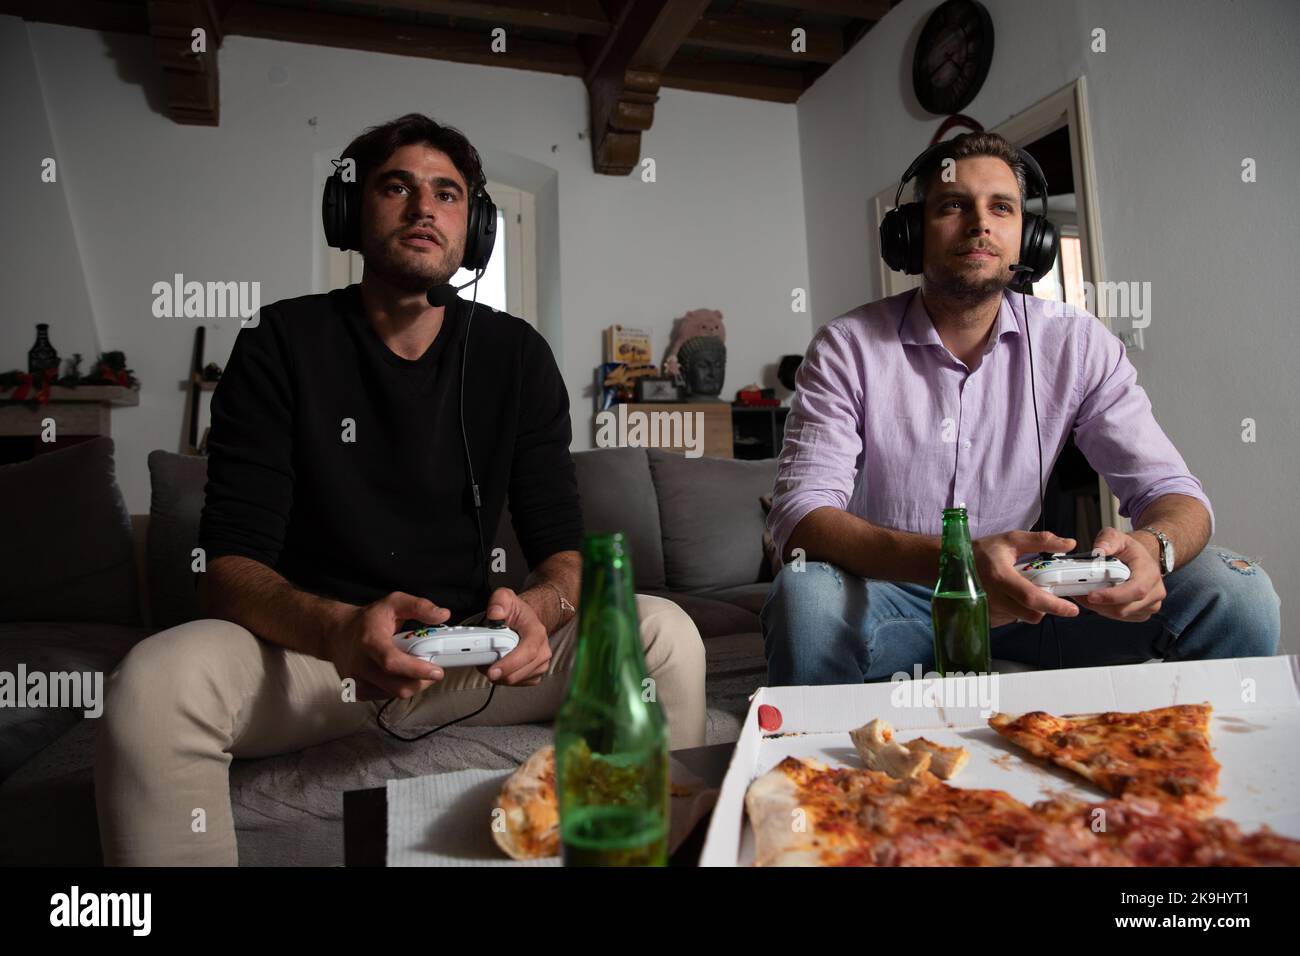 Concentrated friends playing hard and fast at video games with pizza and beer on the table. Stock Photo